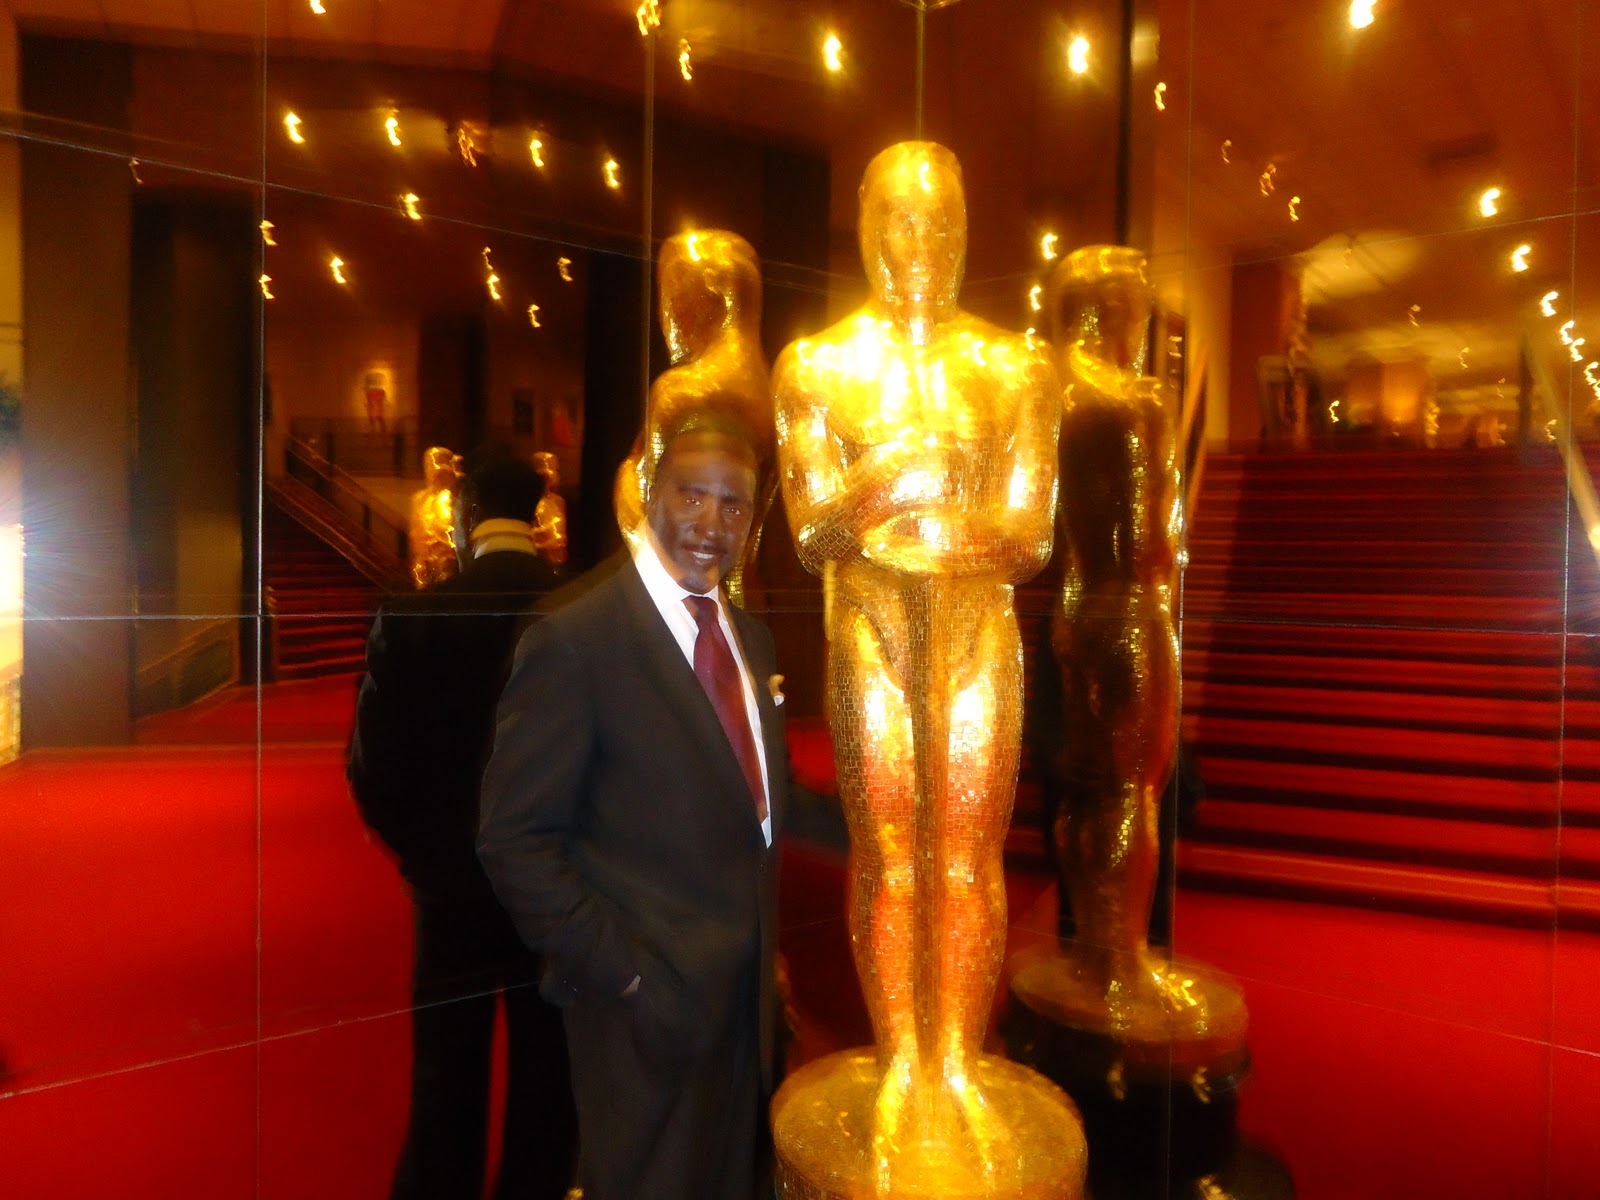 ME & OSCAR-The 50th Anniversary of The Judgement of Nuremberg. Directed by Stanly Kramer. Academy of Arts & Sciences. Beverly Hills, CA Hills, CA